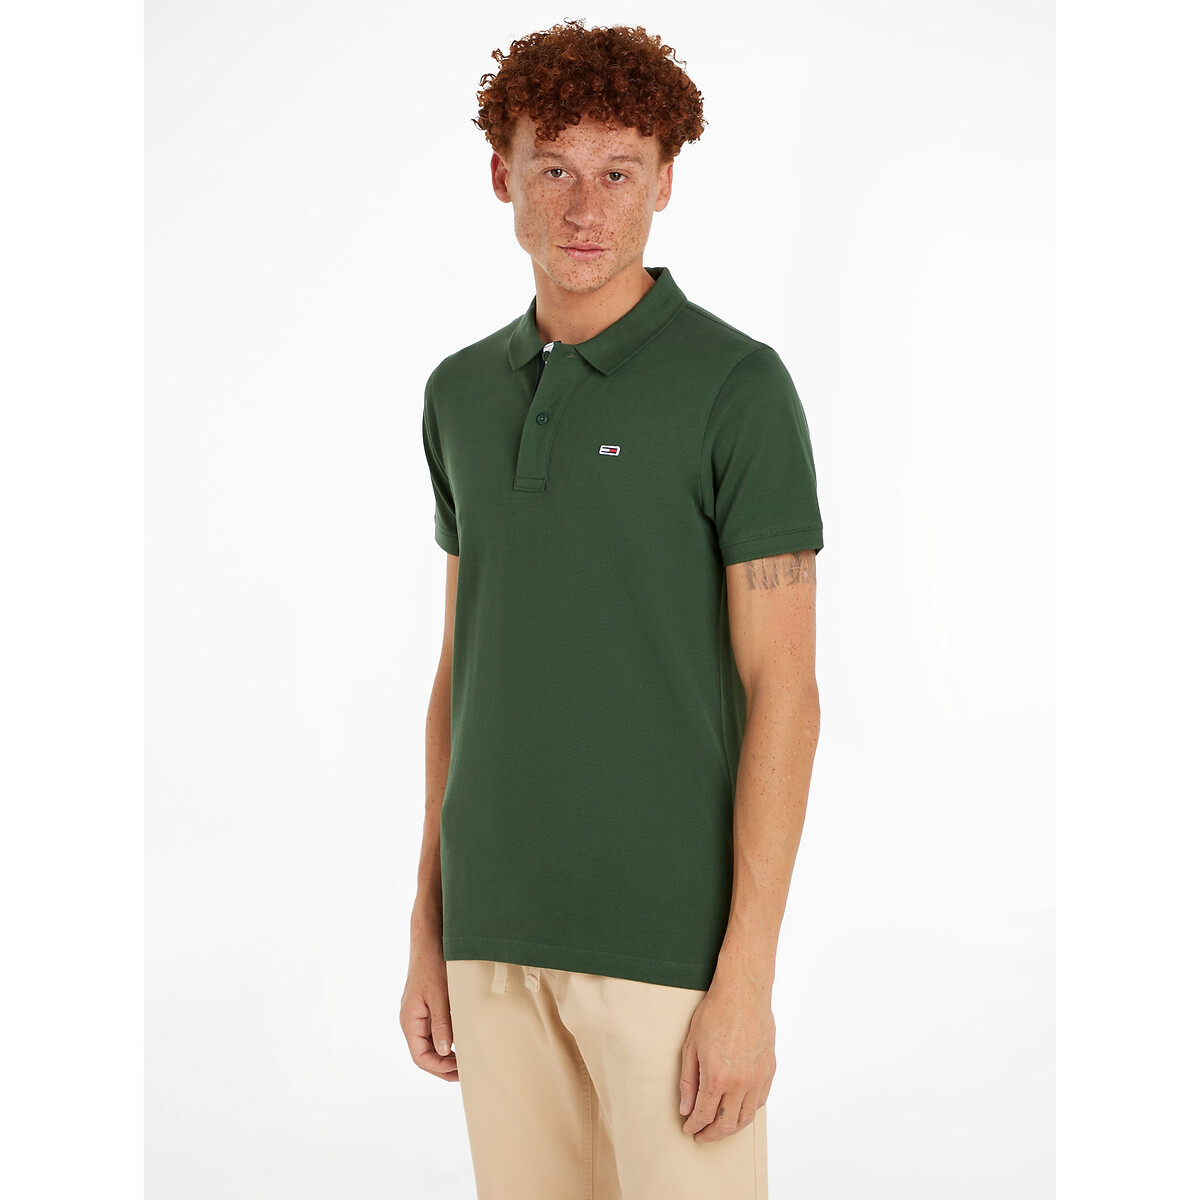 Embroidered Logo Polo Shirt in Cotton with Short Sleeves